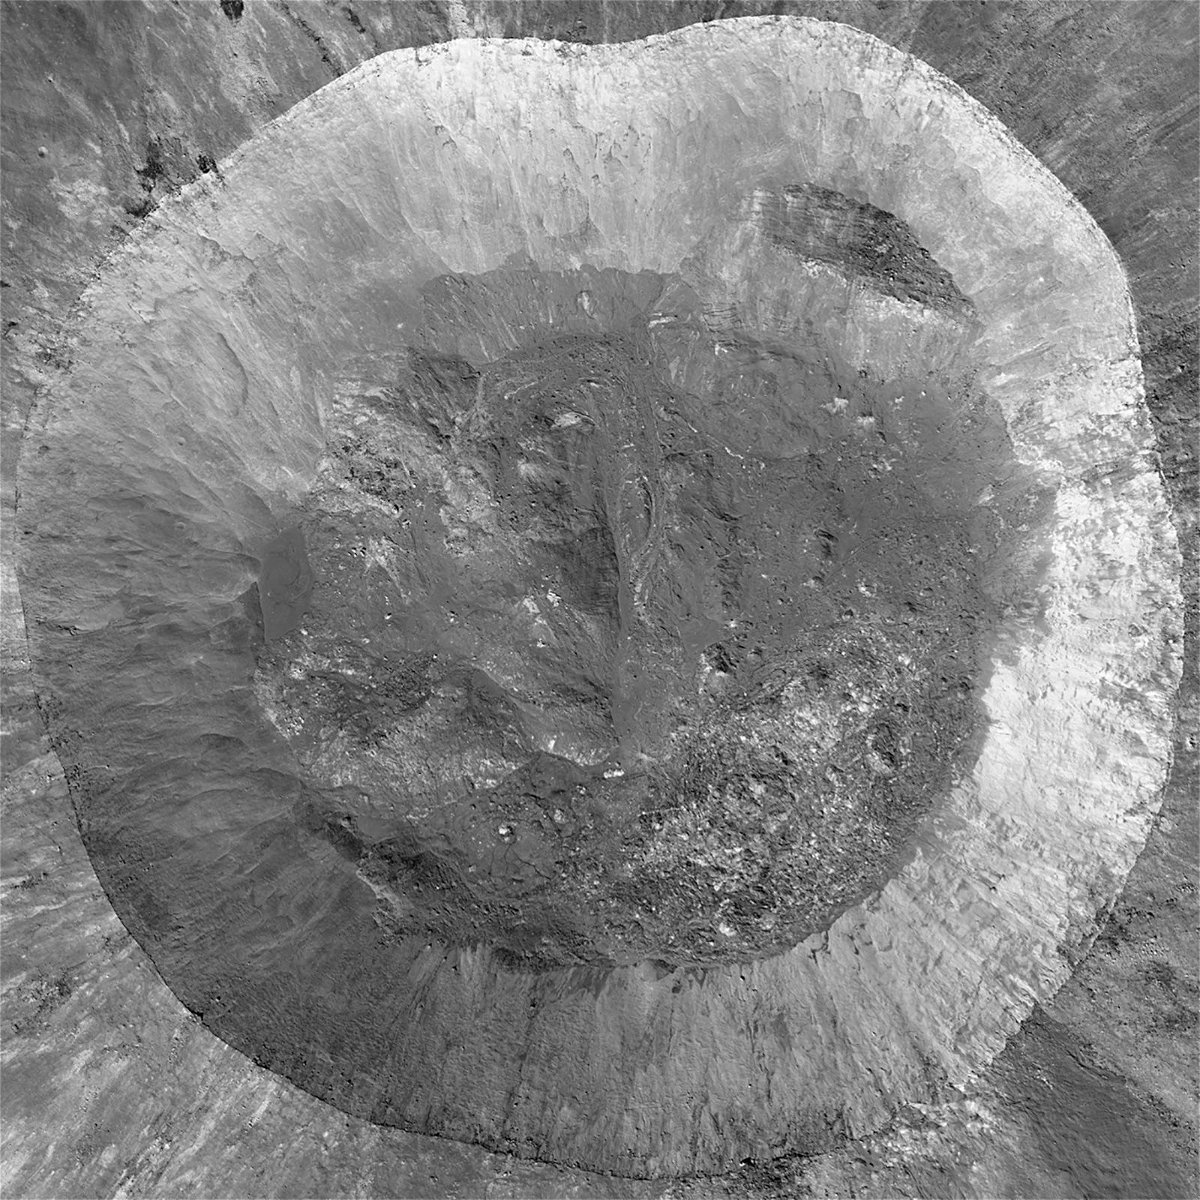 The Giordano Bruno crater matched all of the criteria determined by impact simulations in the study.